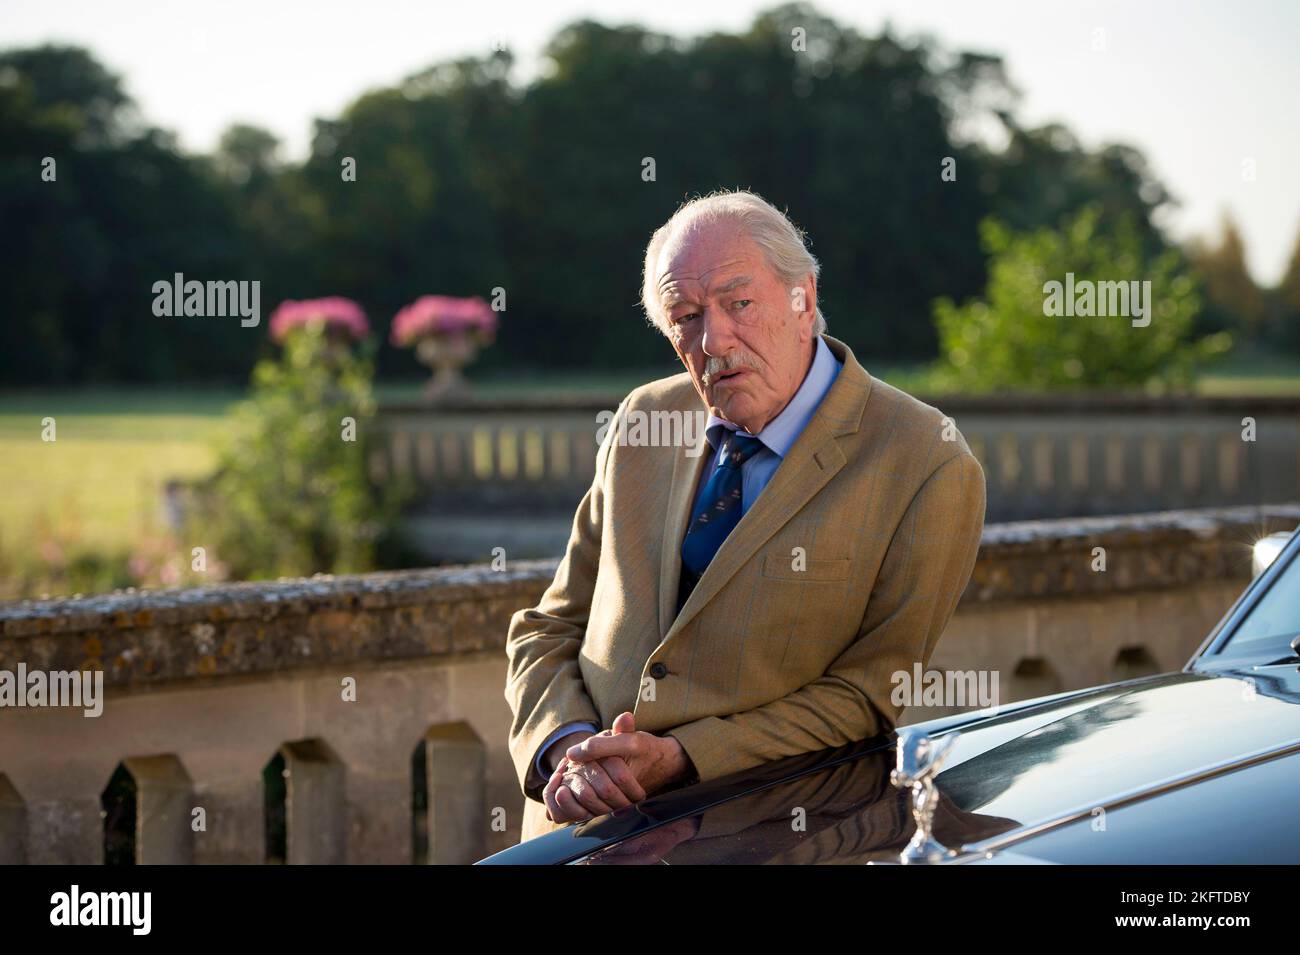 MICHAEL GAMBON in THE CASUAL VACANCY (2015), directed by JONNY CAMPBELL. Credit: Bronte Film and TV / BBC / Album Stock Photo